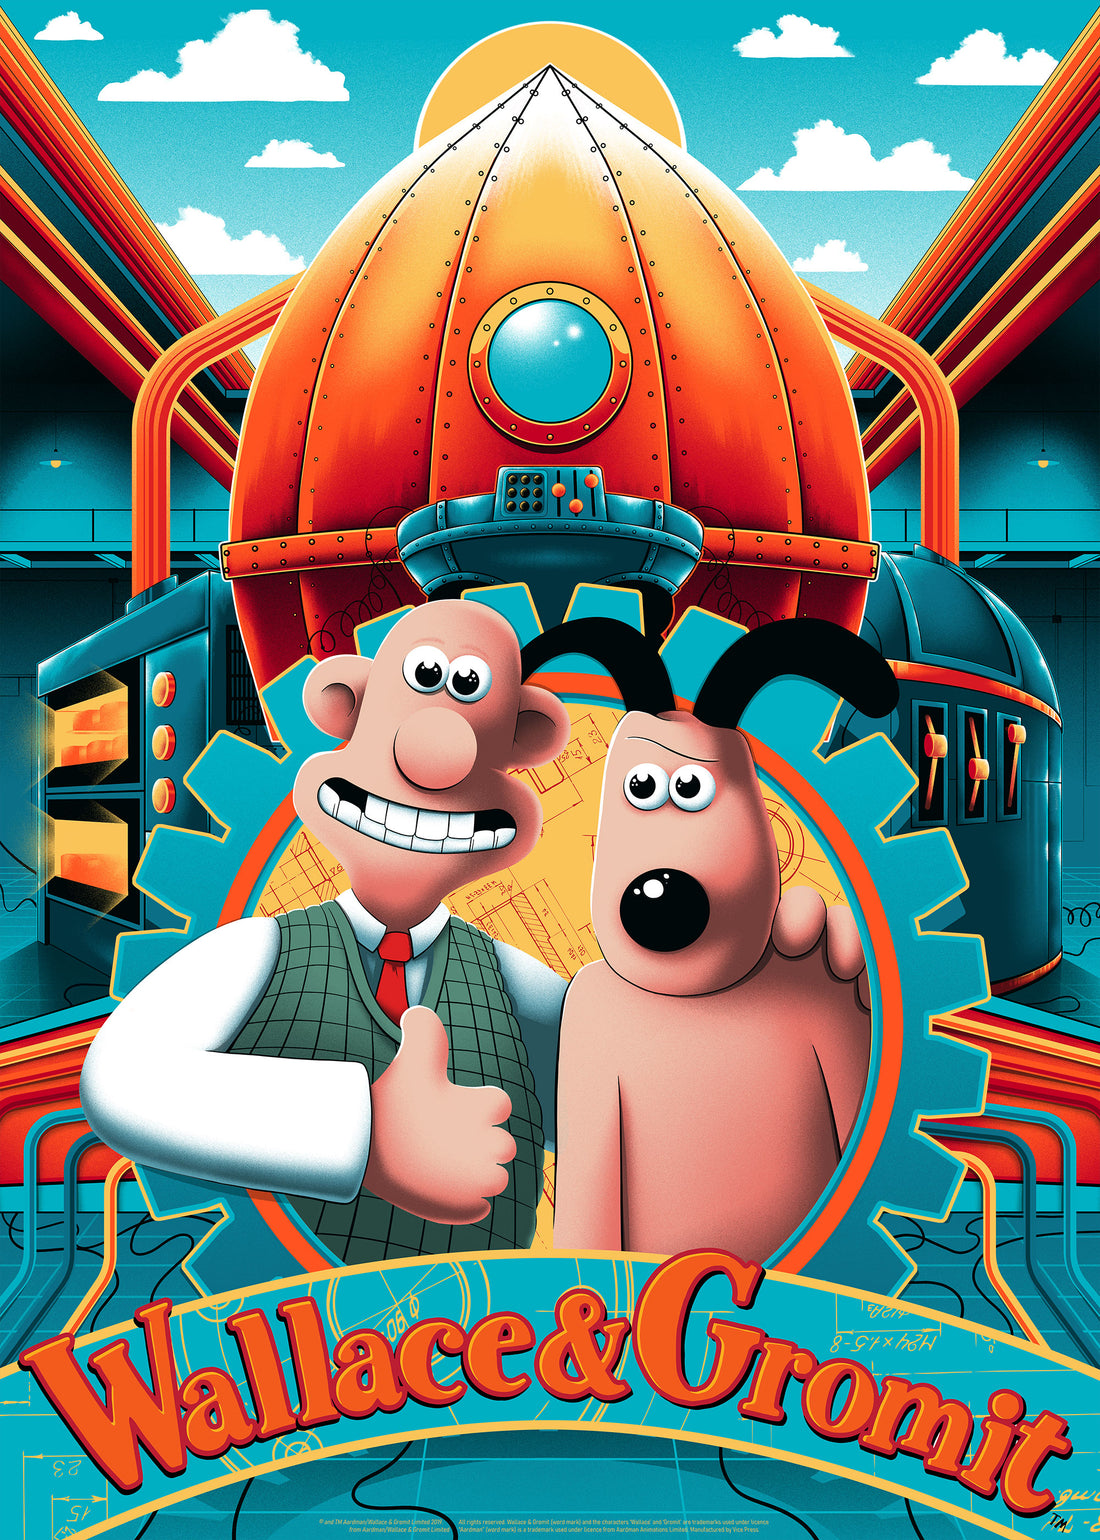 Wallace and Gromit Art Print Poster Arno Kiss